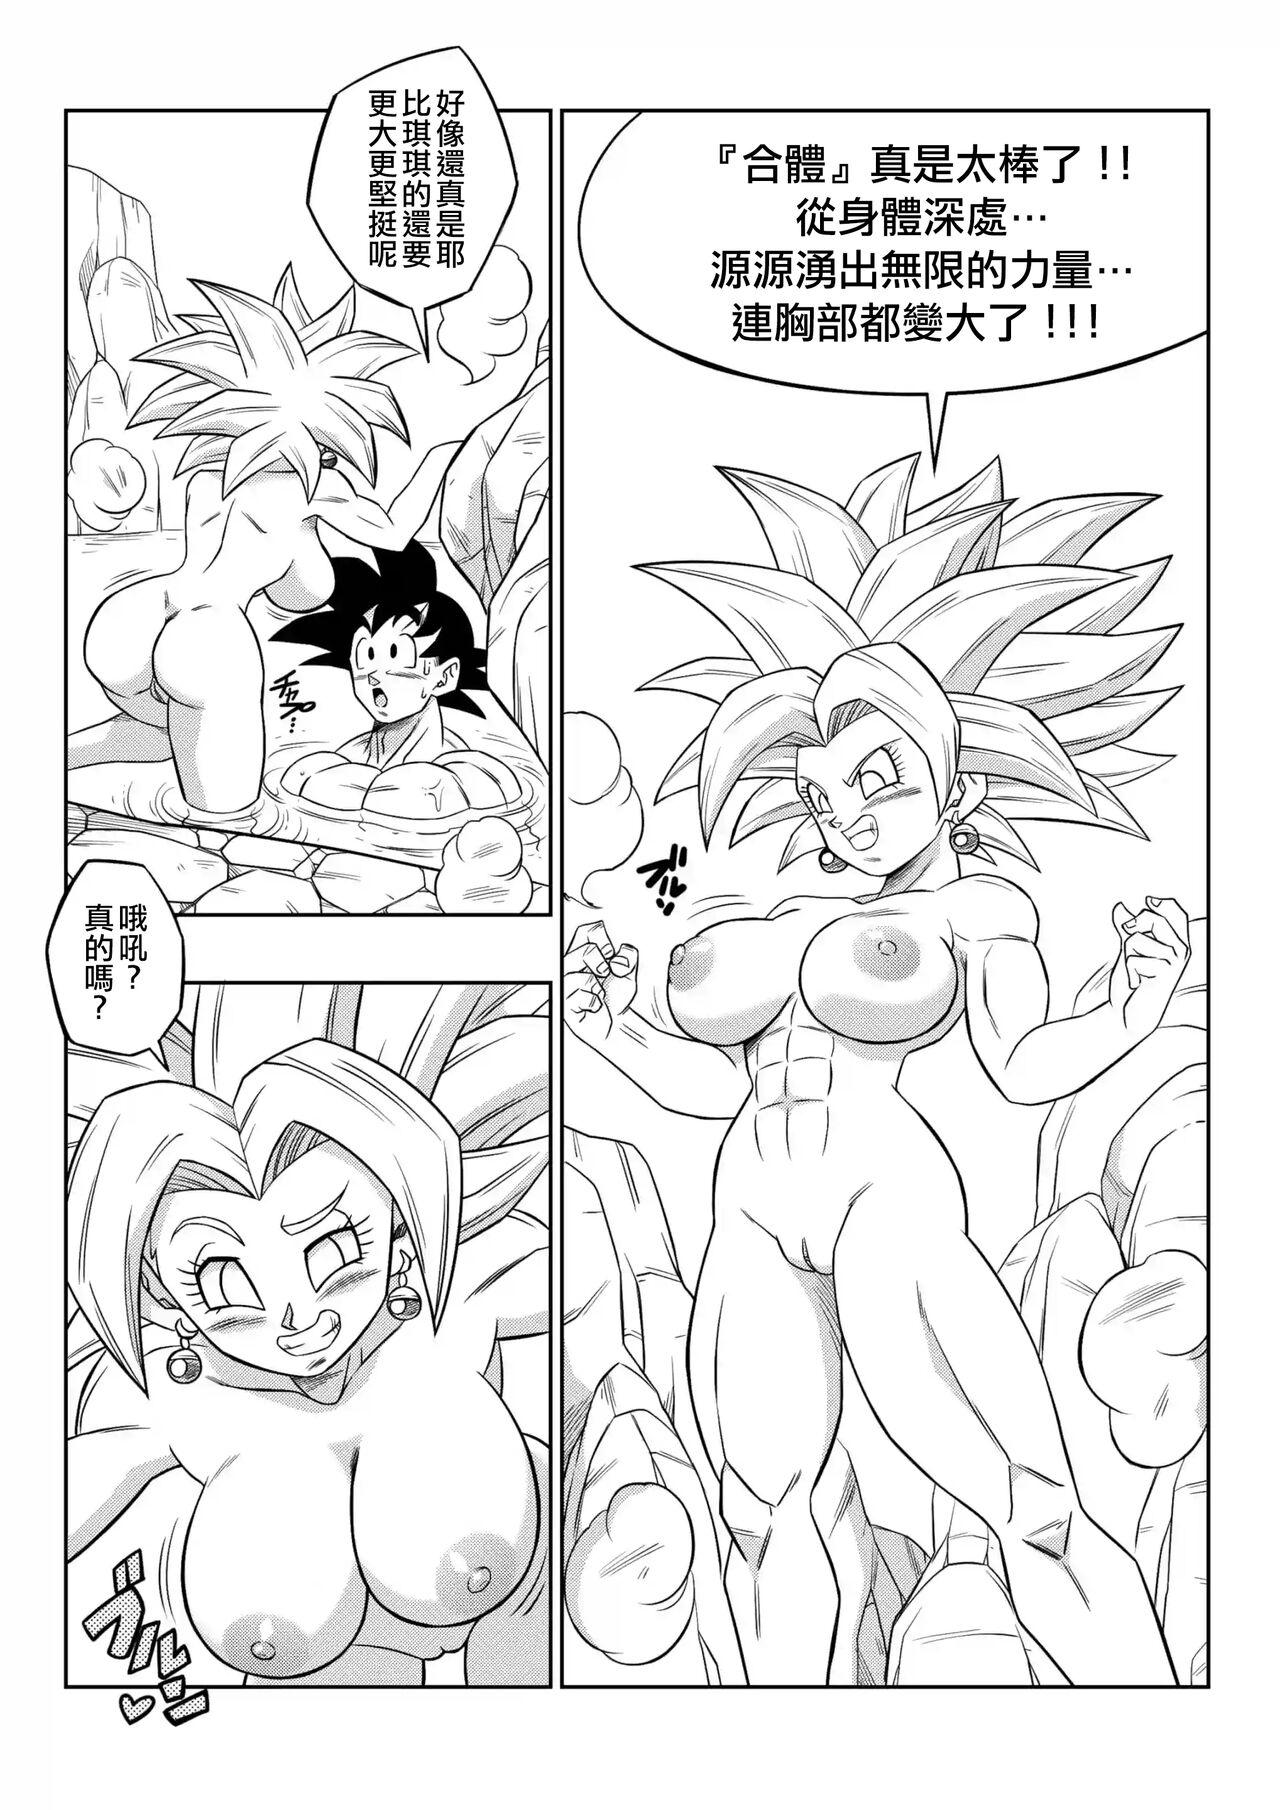 Mms Fight in the 6th Universe!!! - Dragon ball super Imvu - Page 10